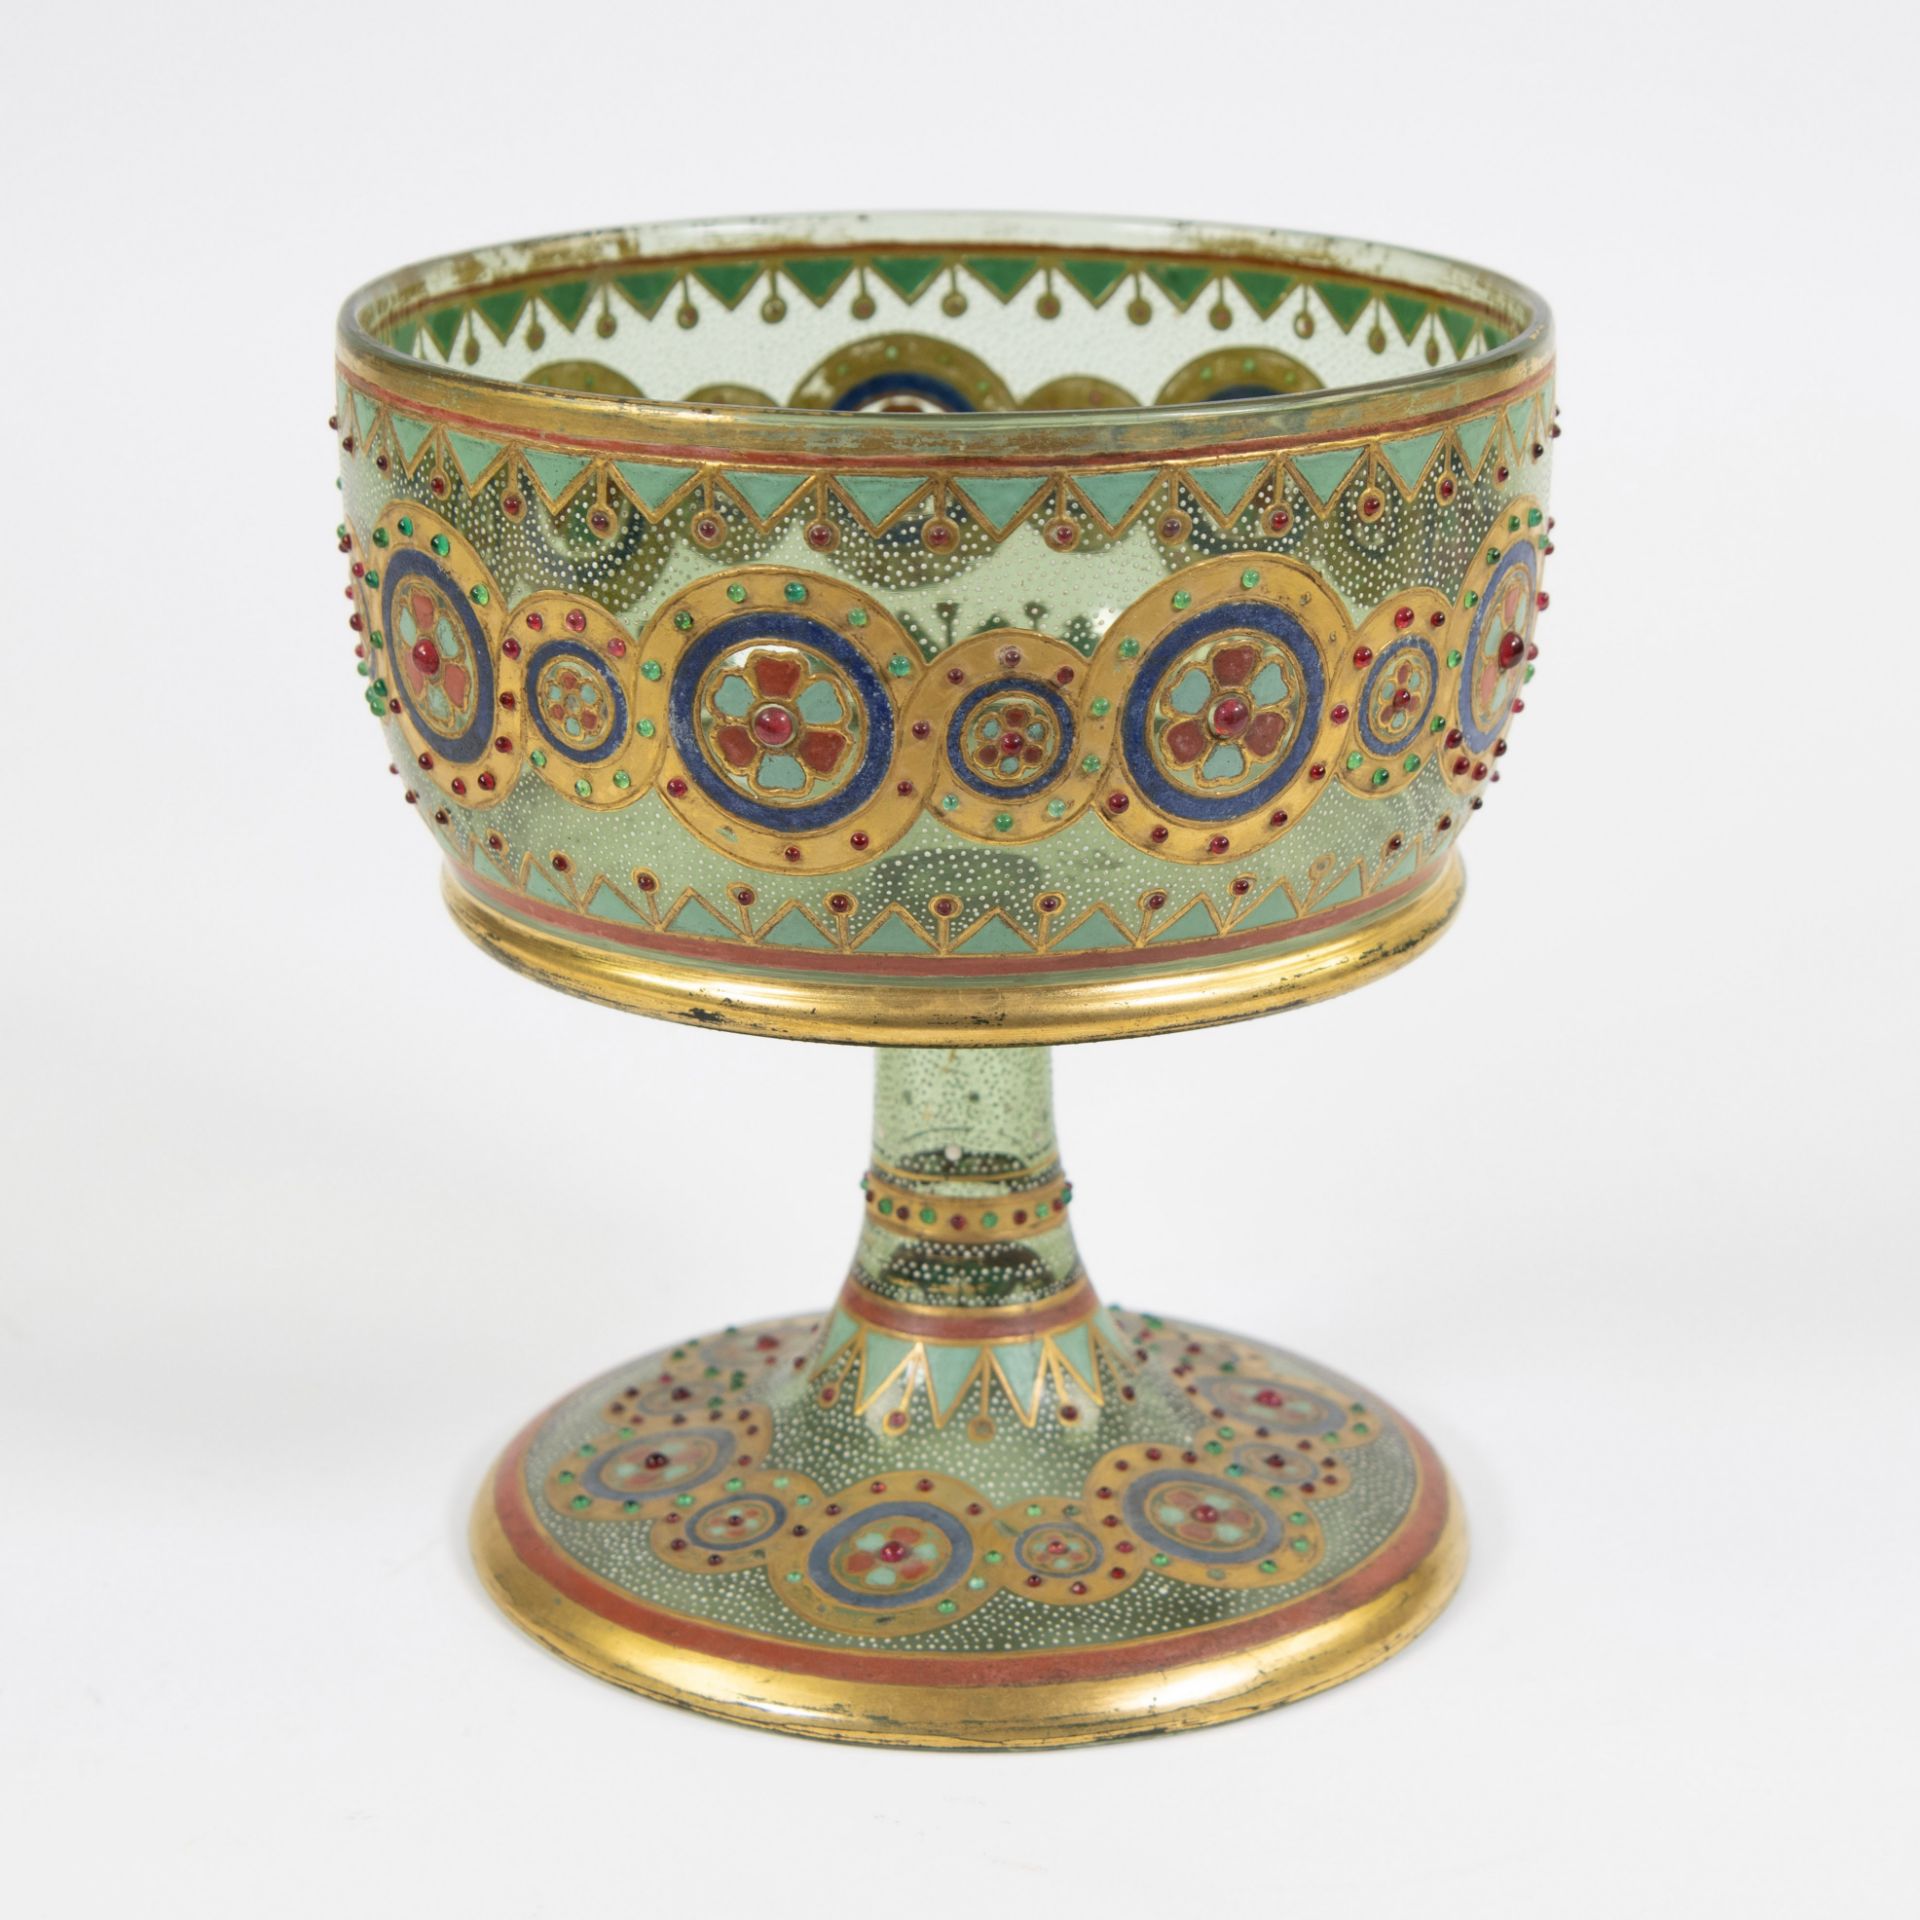 19th century Venetian glass coupe hand-painted and enamelled - Image 2 of 6